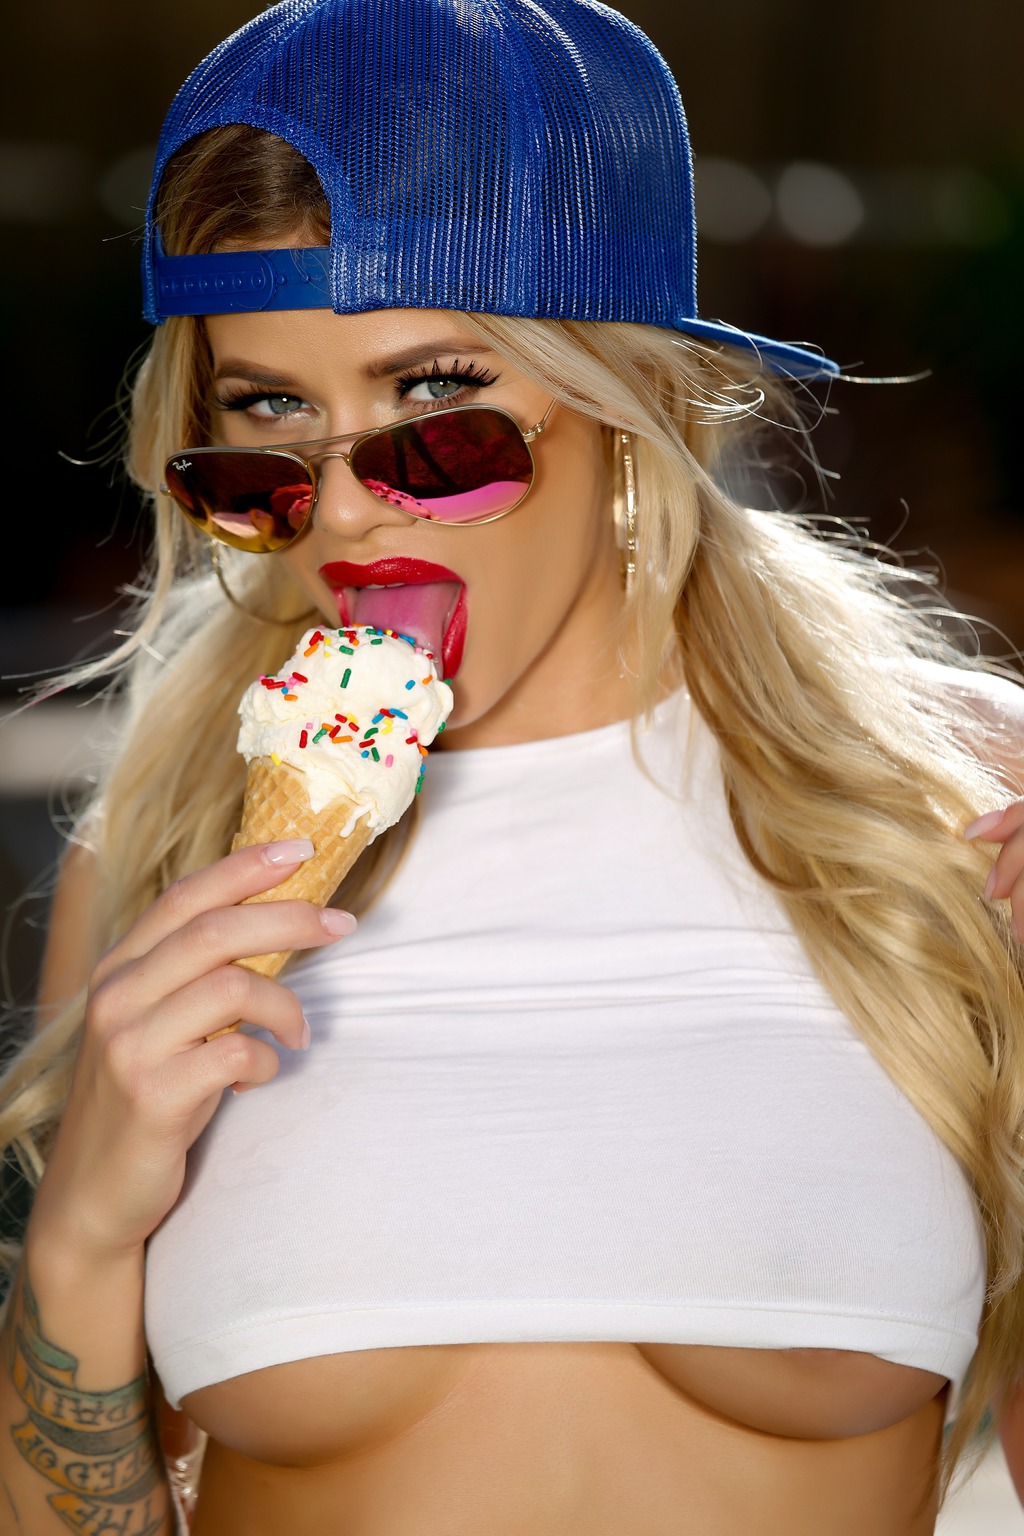 Jessa Rhodes In Messy Fun With Food 02